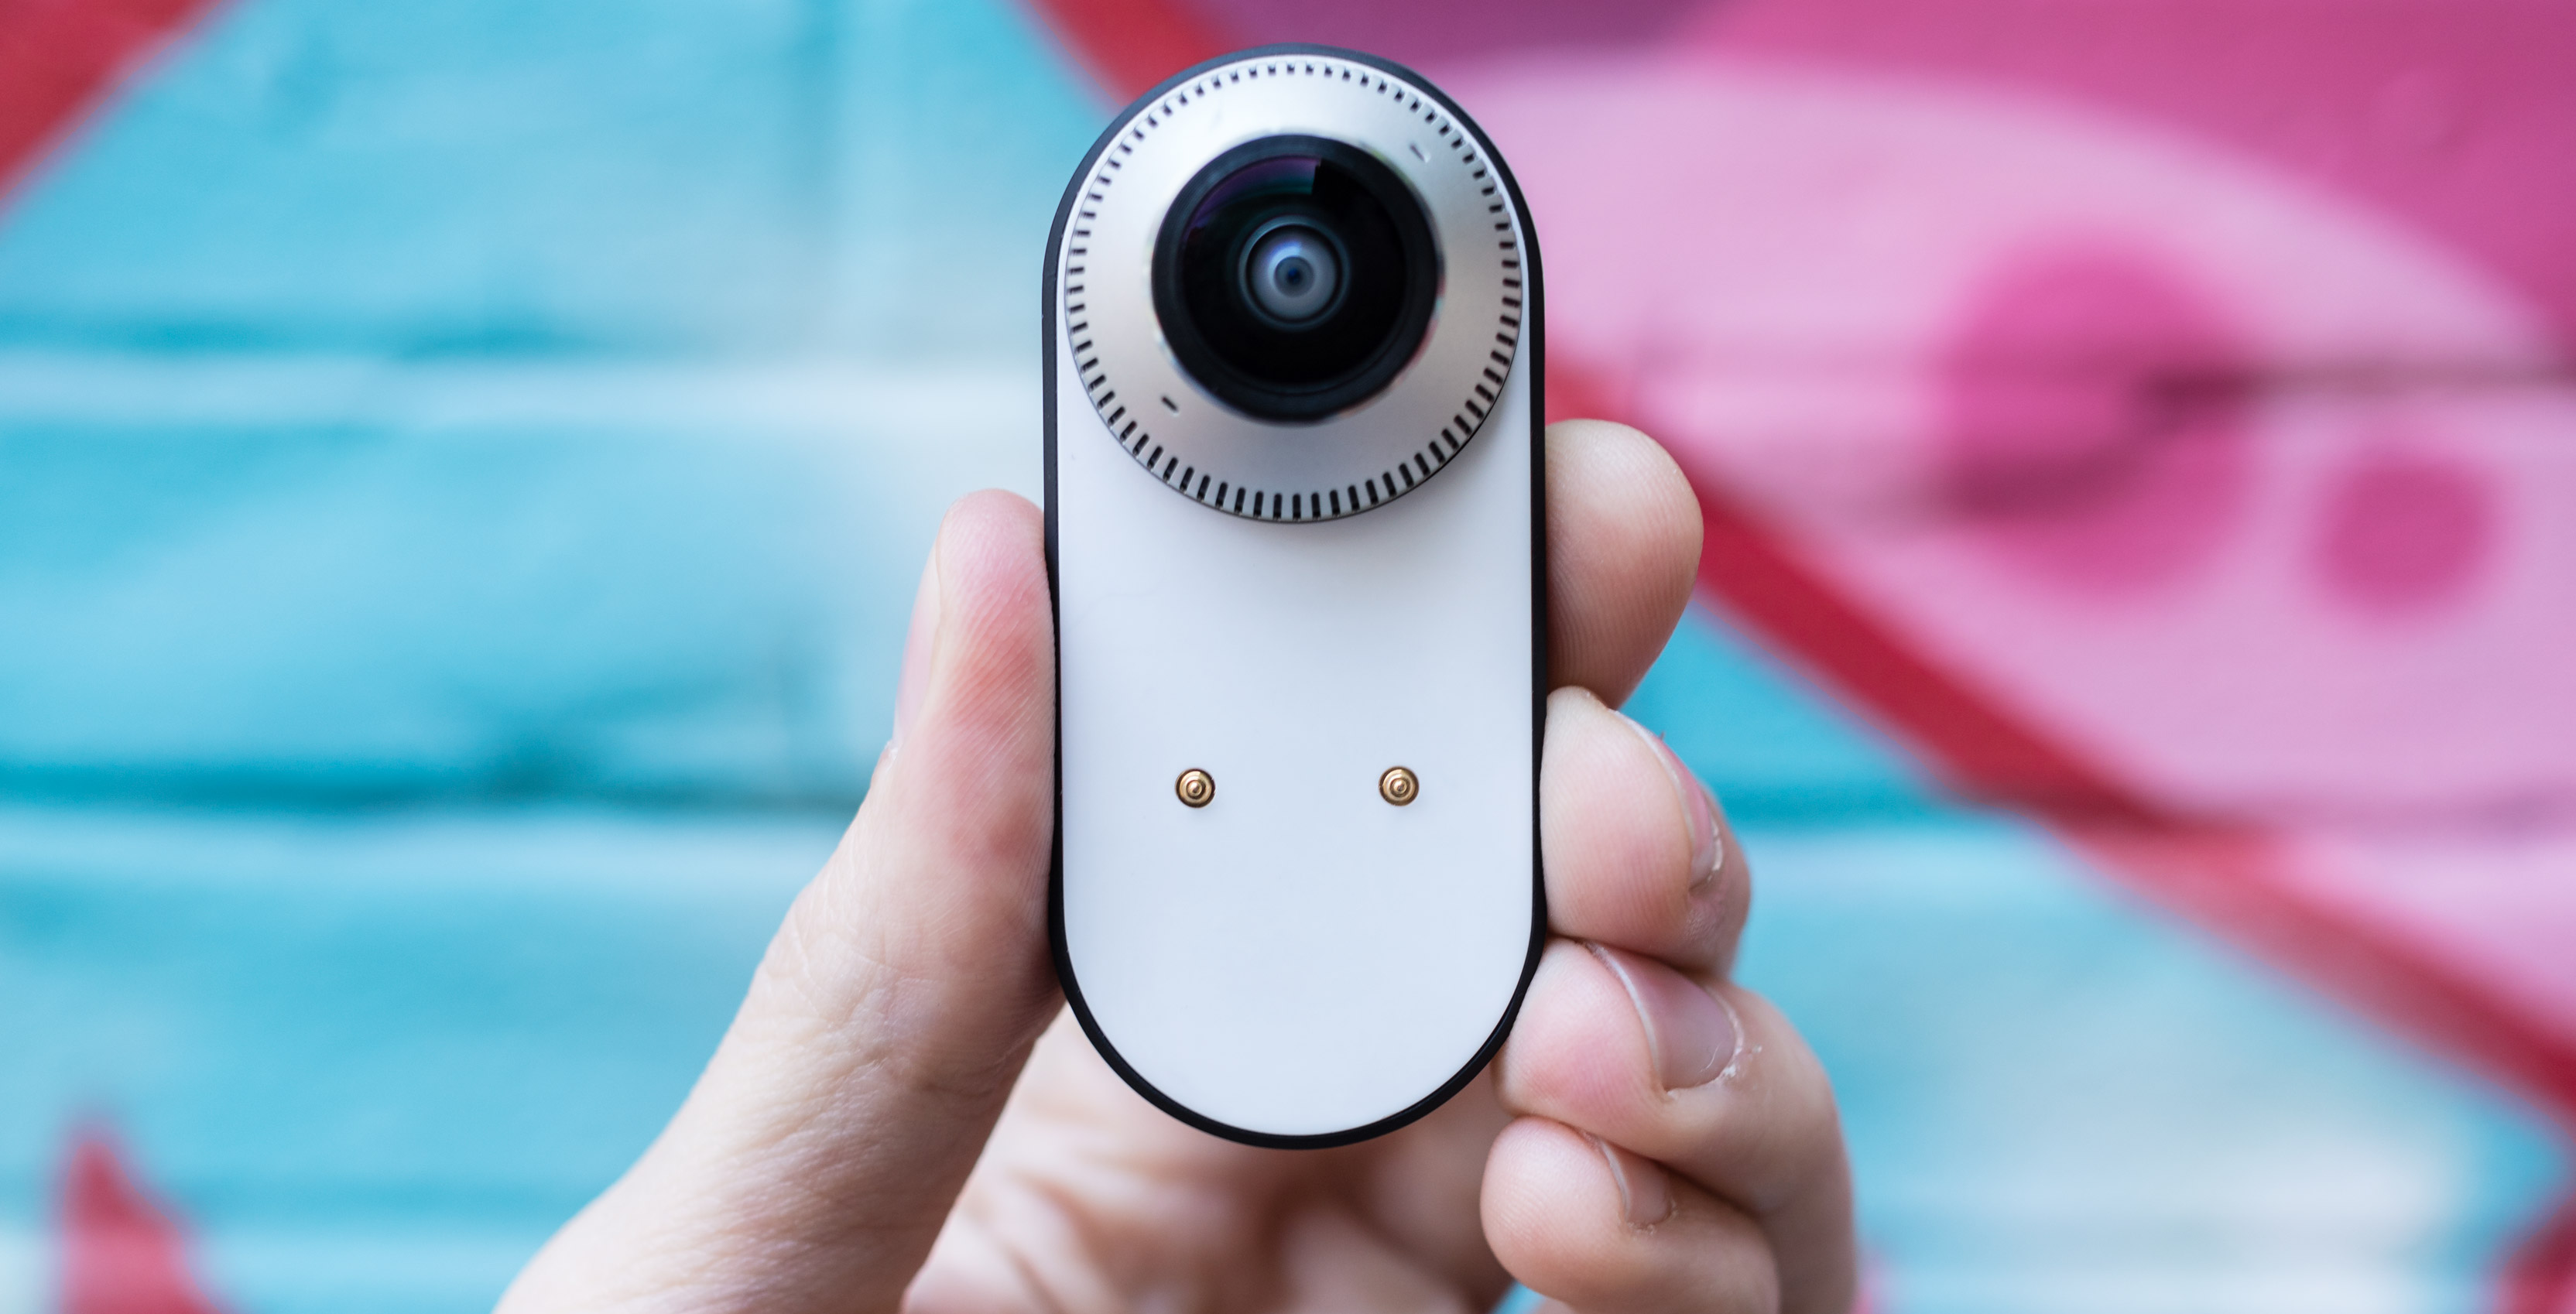 A view of the Essential 360 Camera's magnetic pin connectors